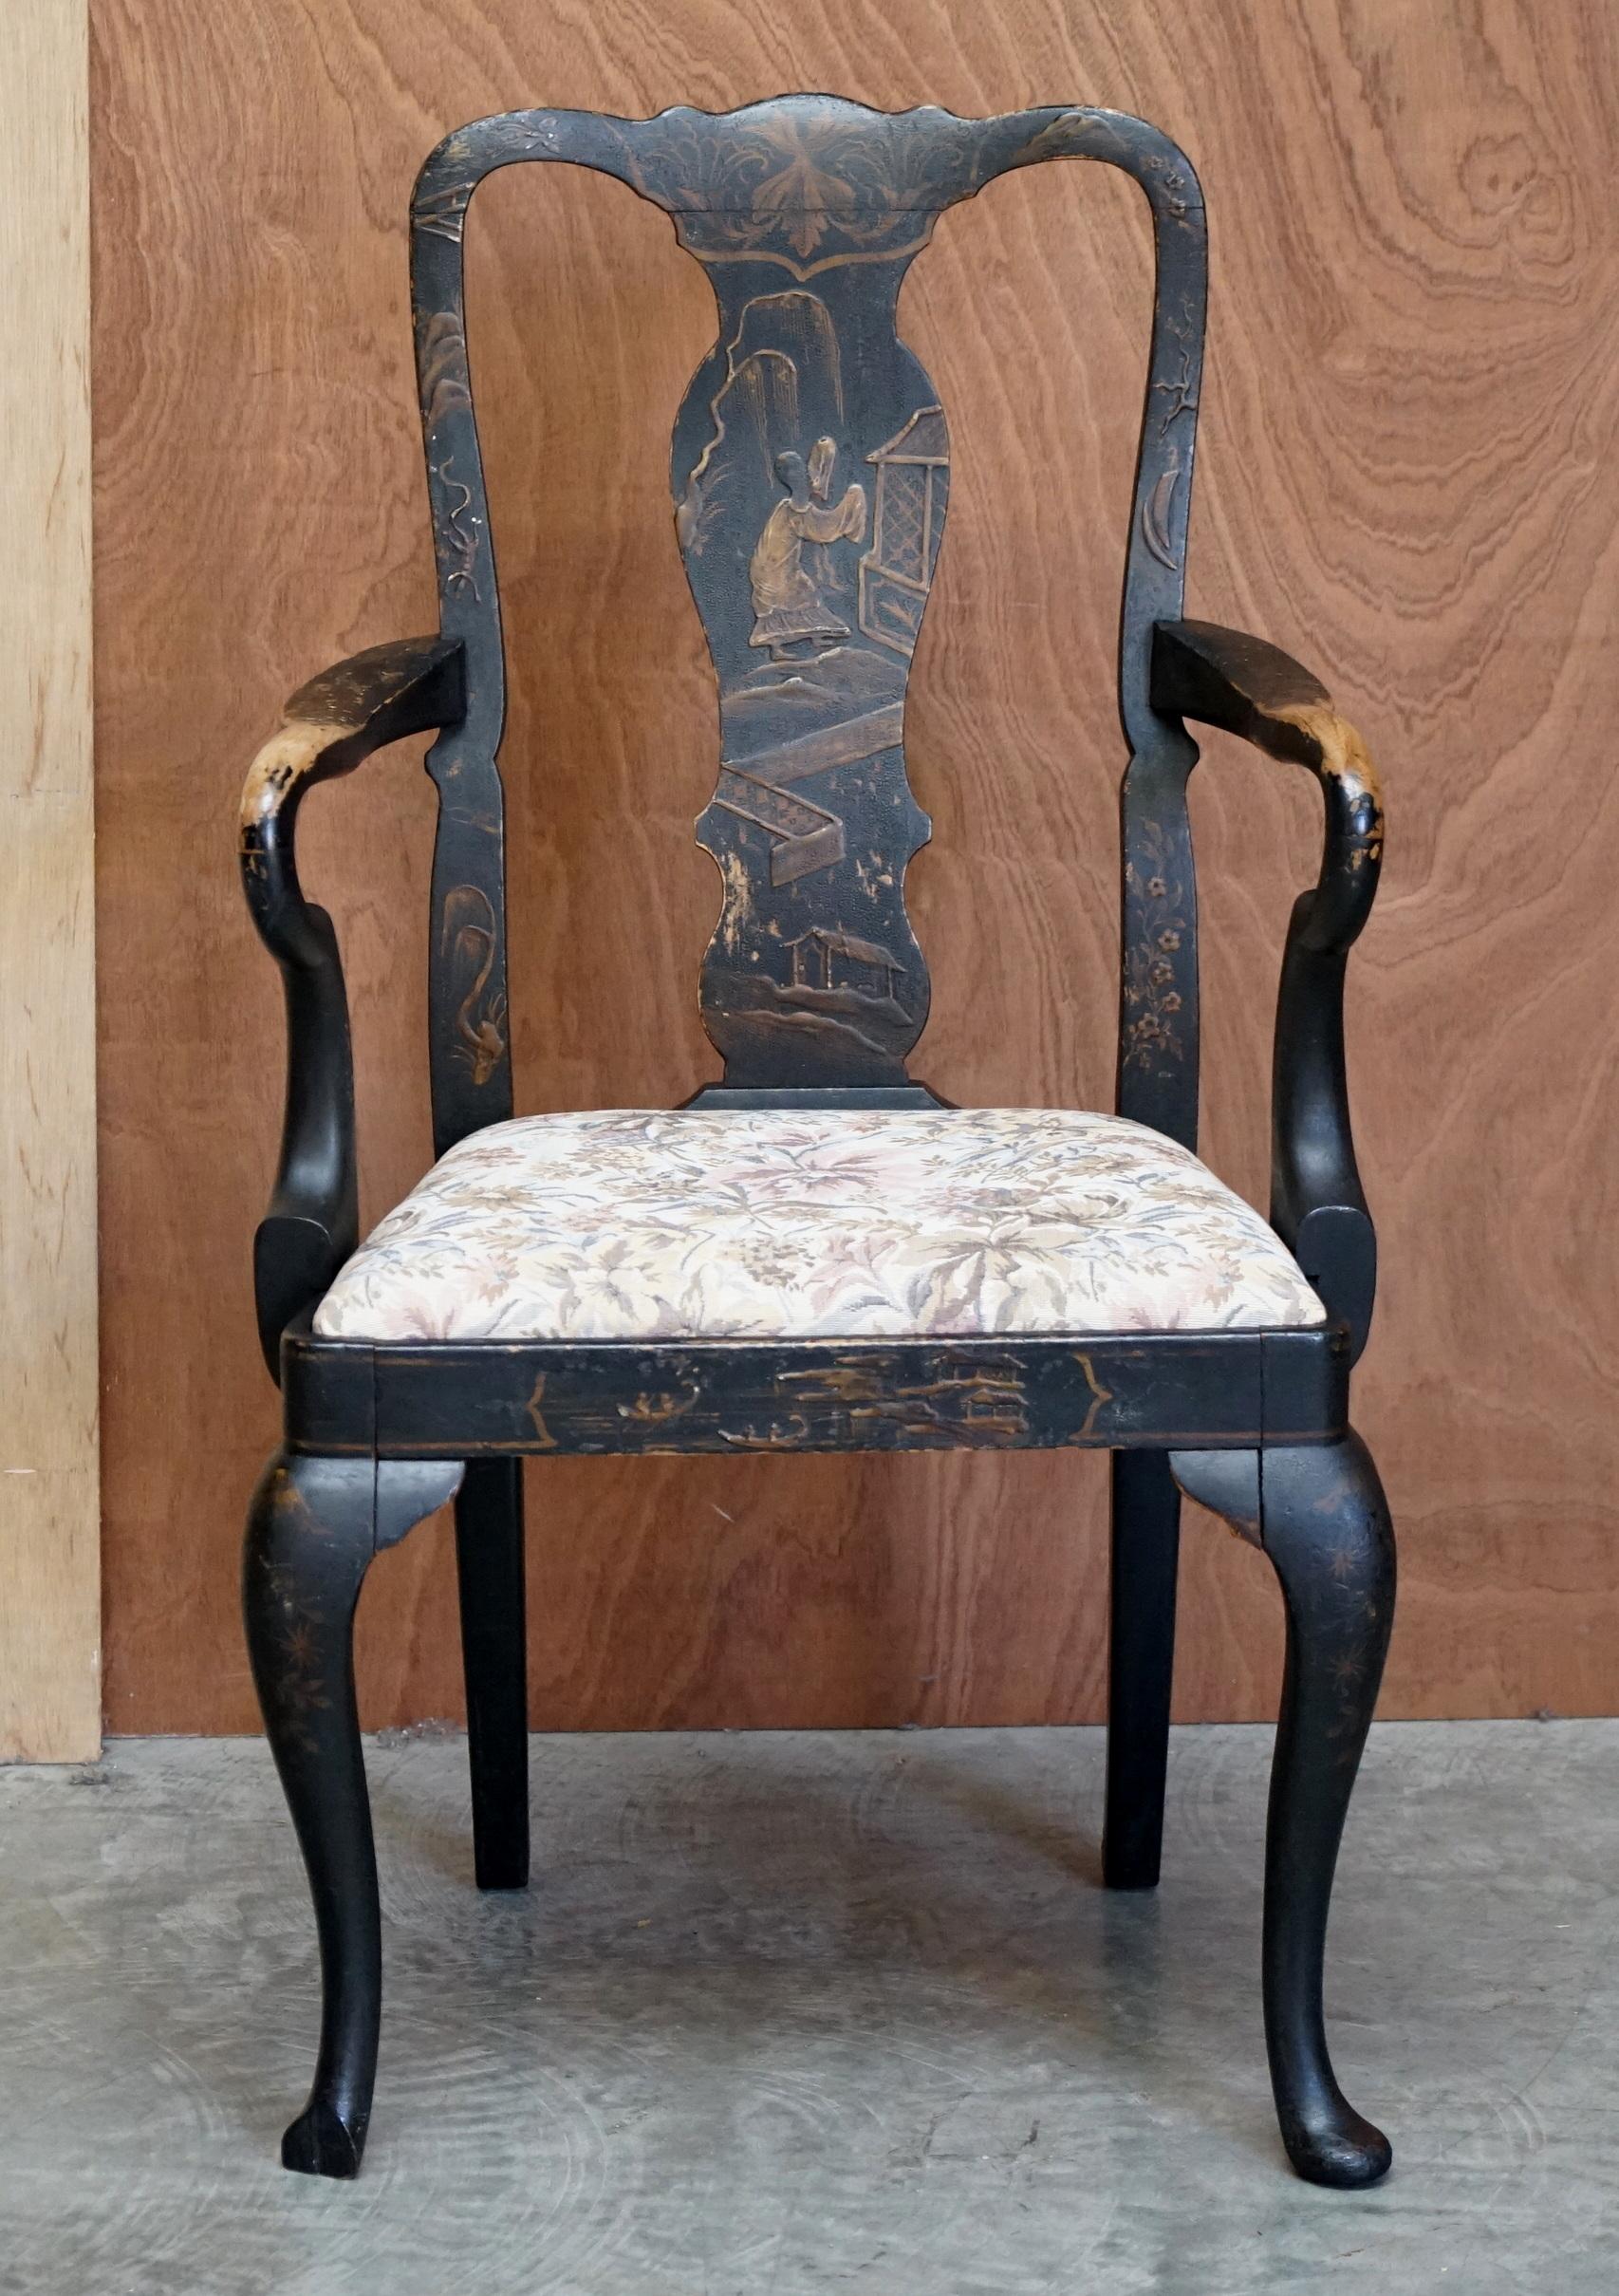 We are delighted to offer for sale this stunning Georgian circa 1800 original paint black lacquered Chinoiserie armchair

What a piece! Based on the early George II chairs which are circa 1740, this is a later early 19th century example which is